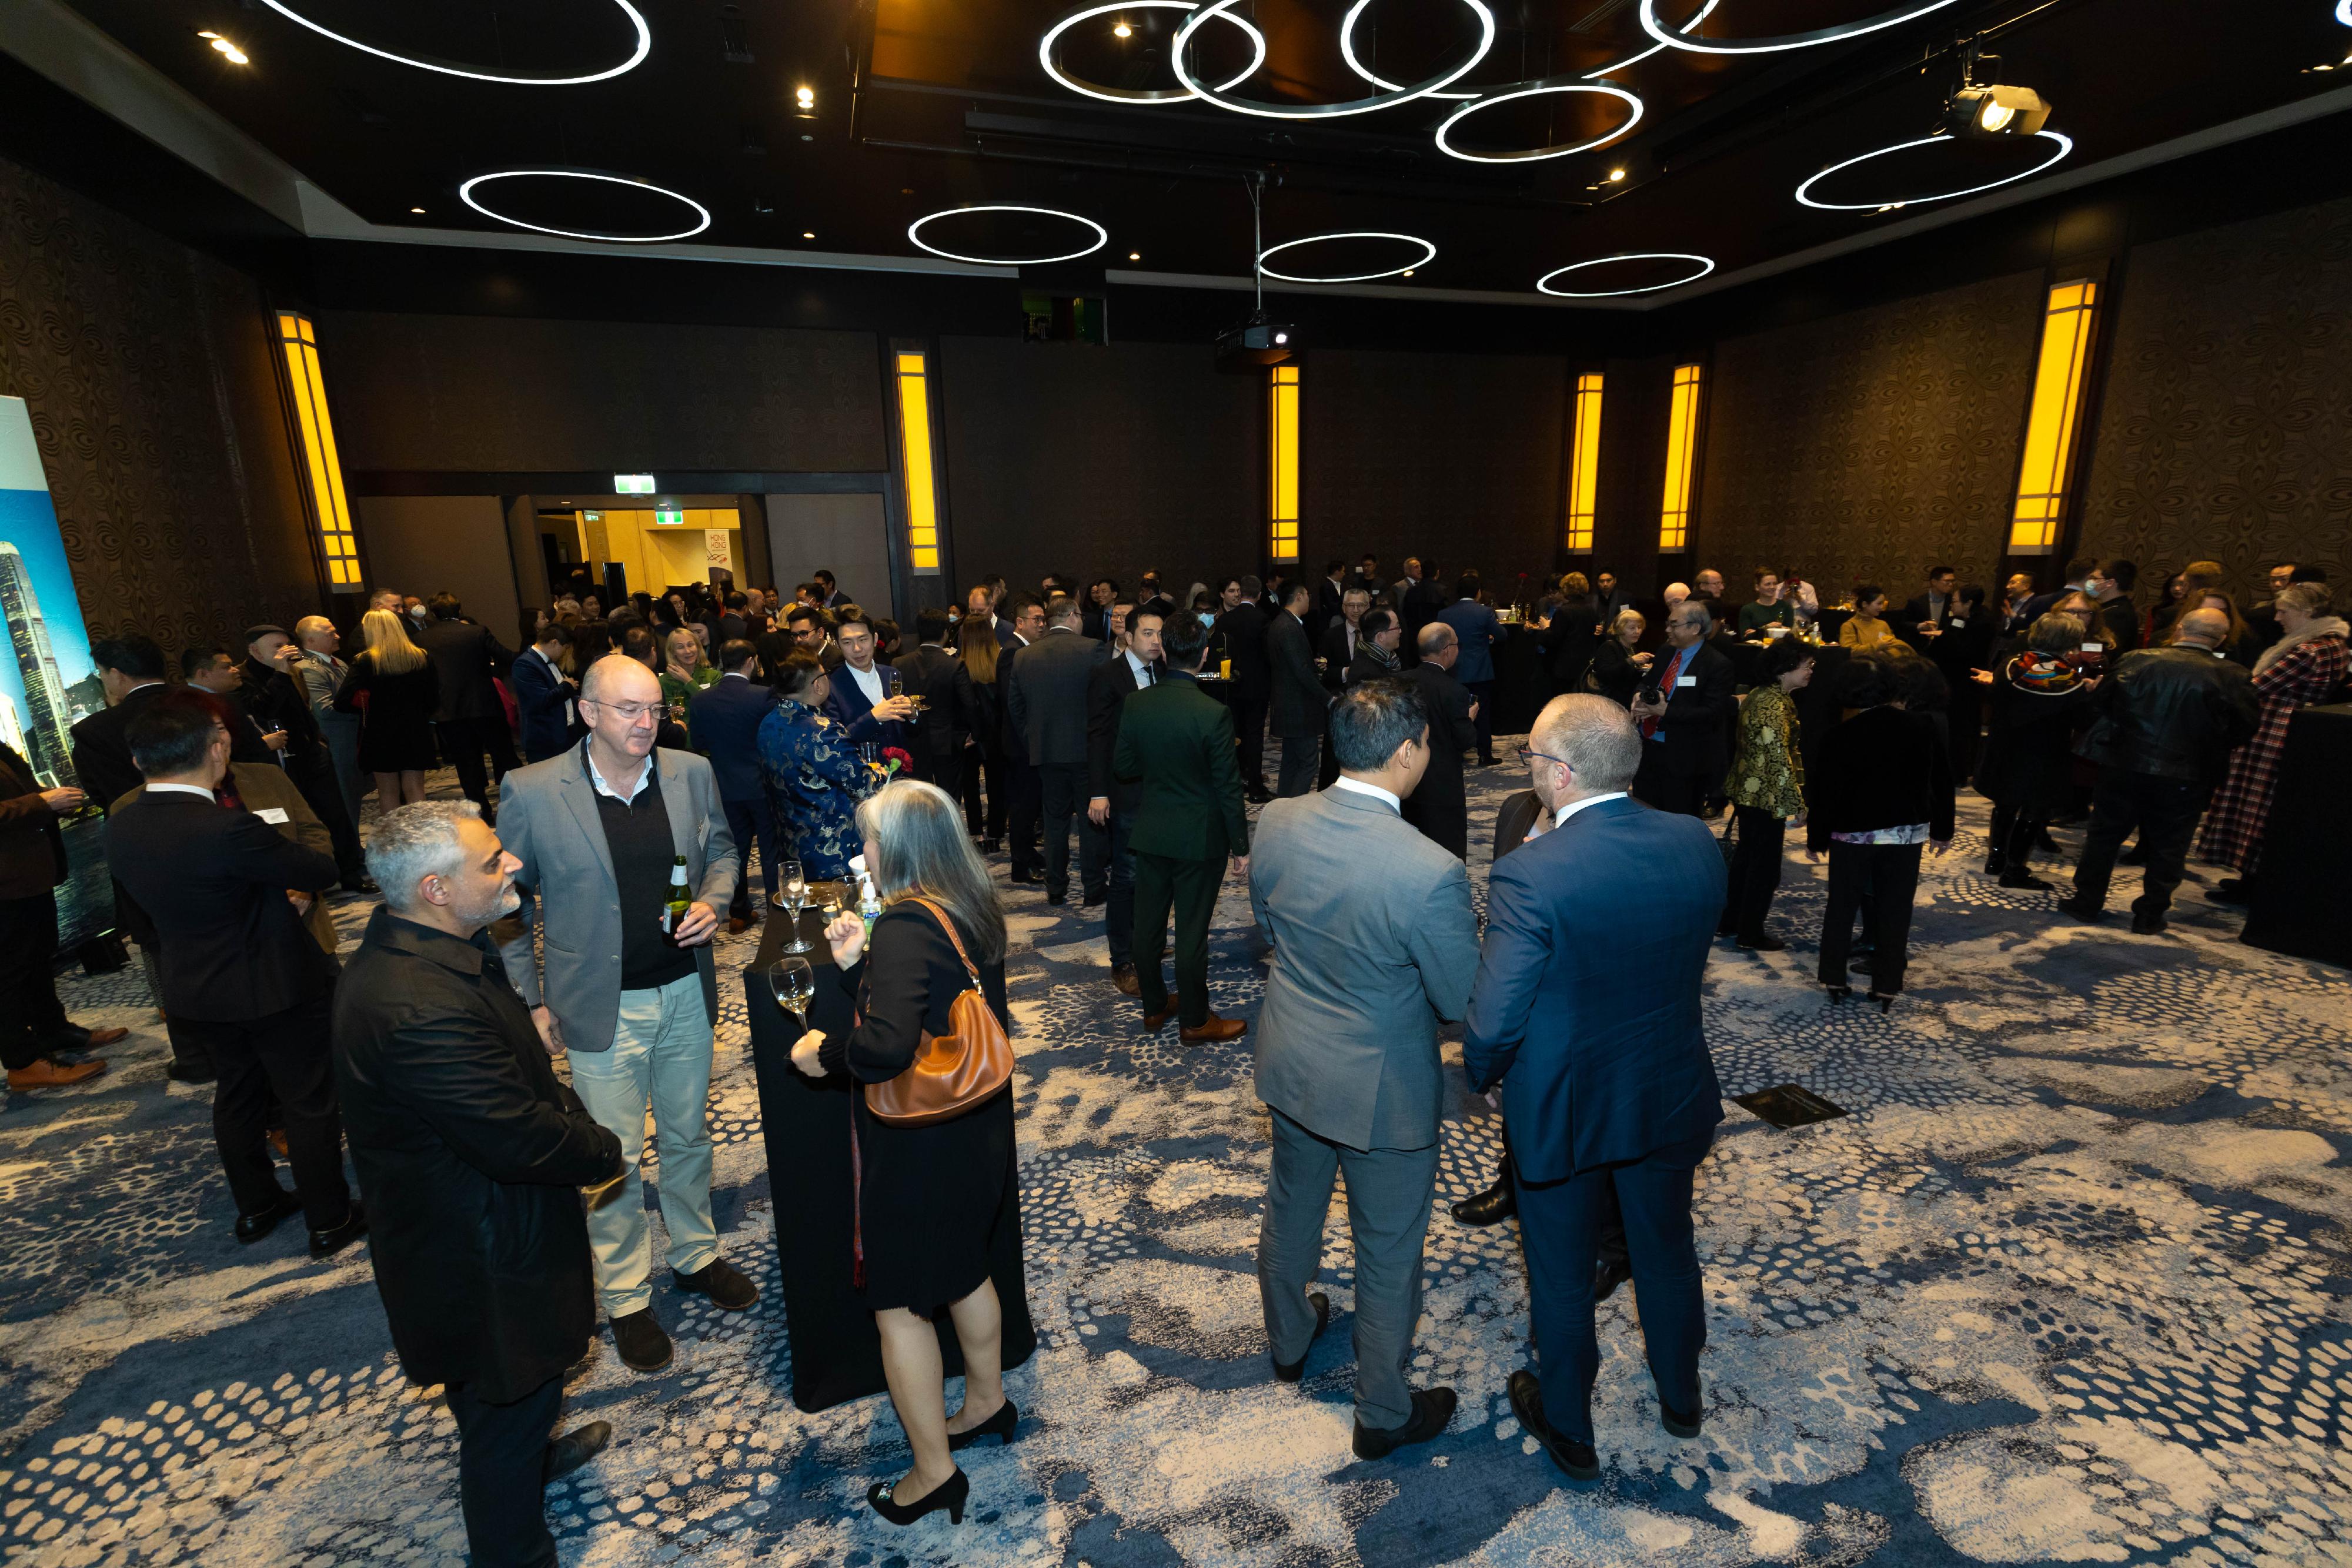 The Hong Kong Economic and Trade Office, Sydney hosted a reception in Melbourne, Australia, yesterday (July 12) to celebrate the 25th anniversary of the establishment of the Hong Kong Special Administrative Region. Around 150 guests from various sectors including political and business circles, media, academic and community groups as well as government representatives attended the reception.